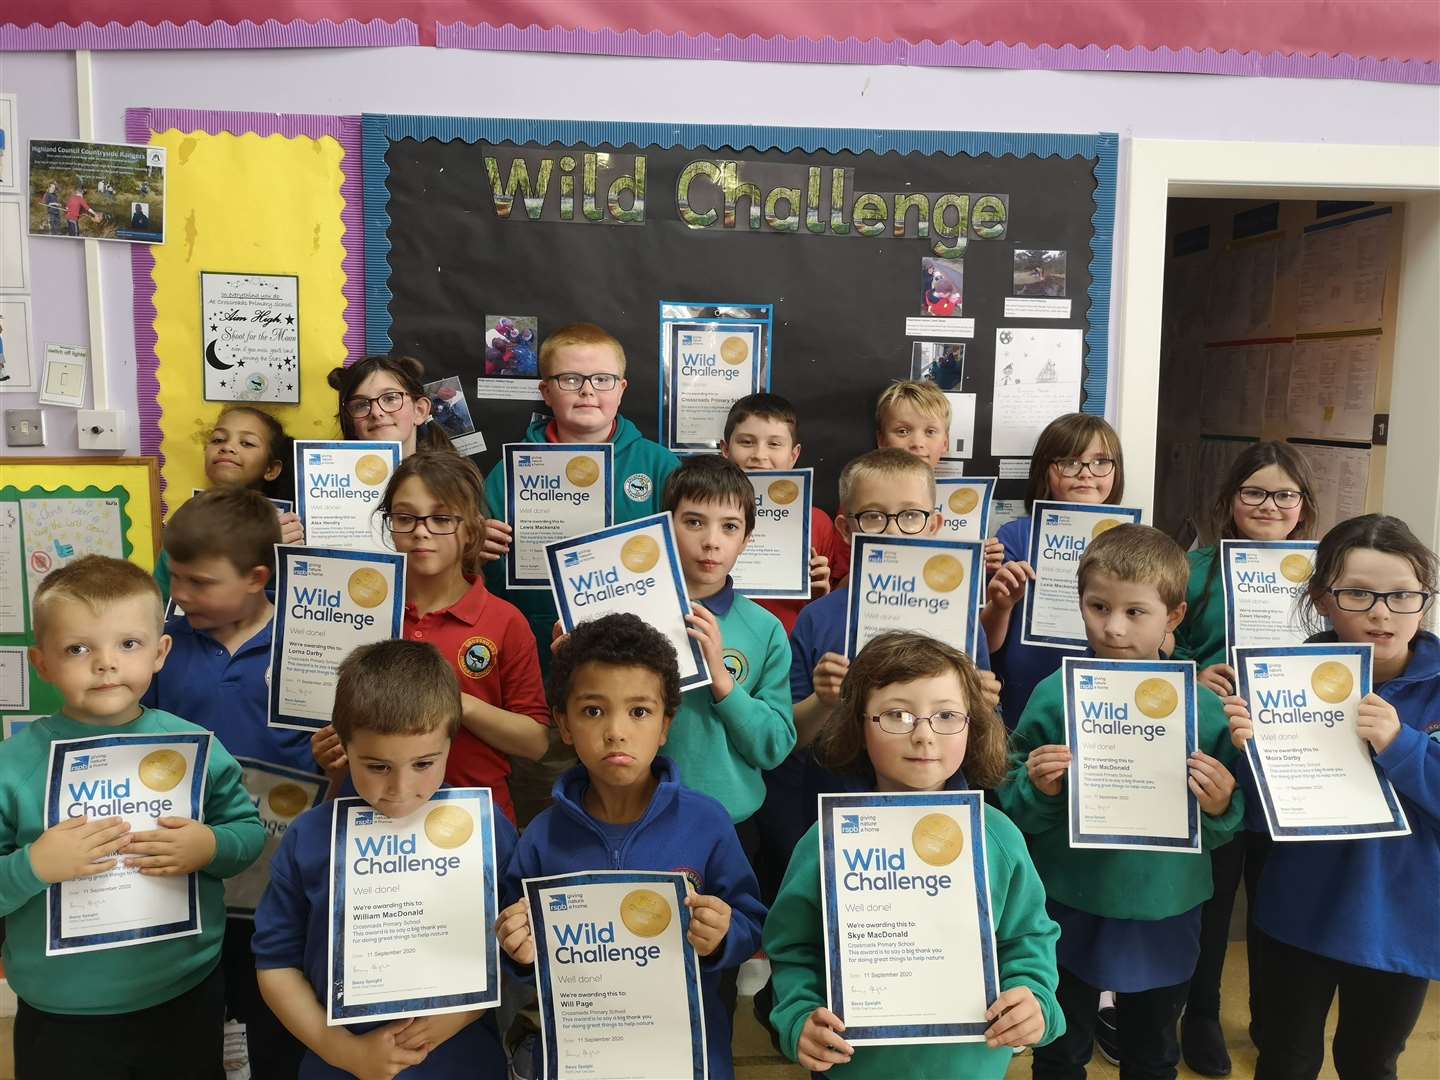 The pupils of Crossroads Primary School have been working on their RSPB Challenge awards since January.